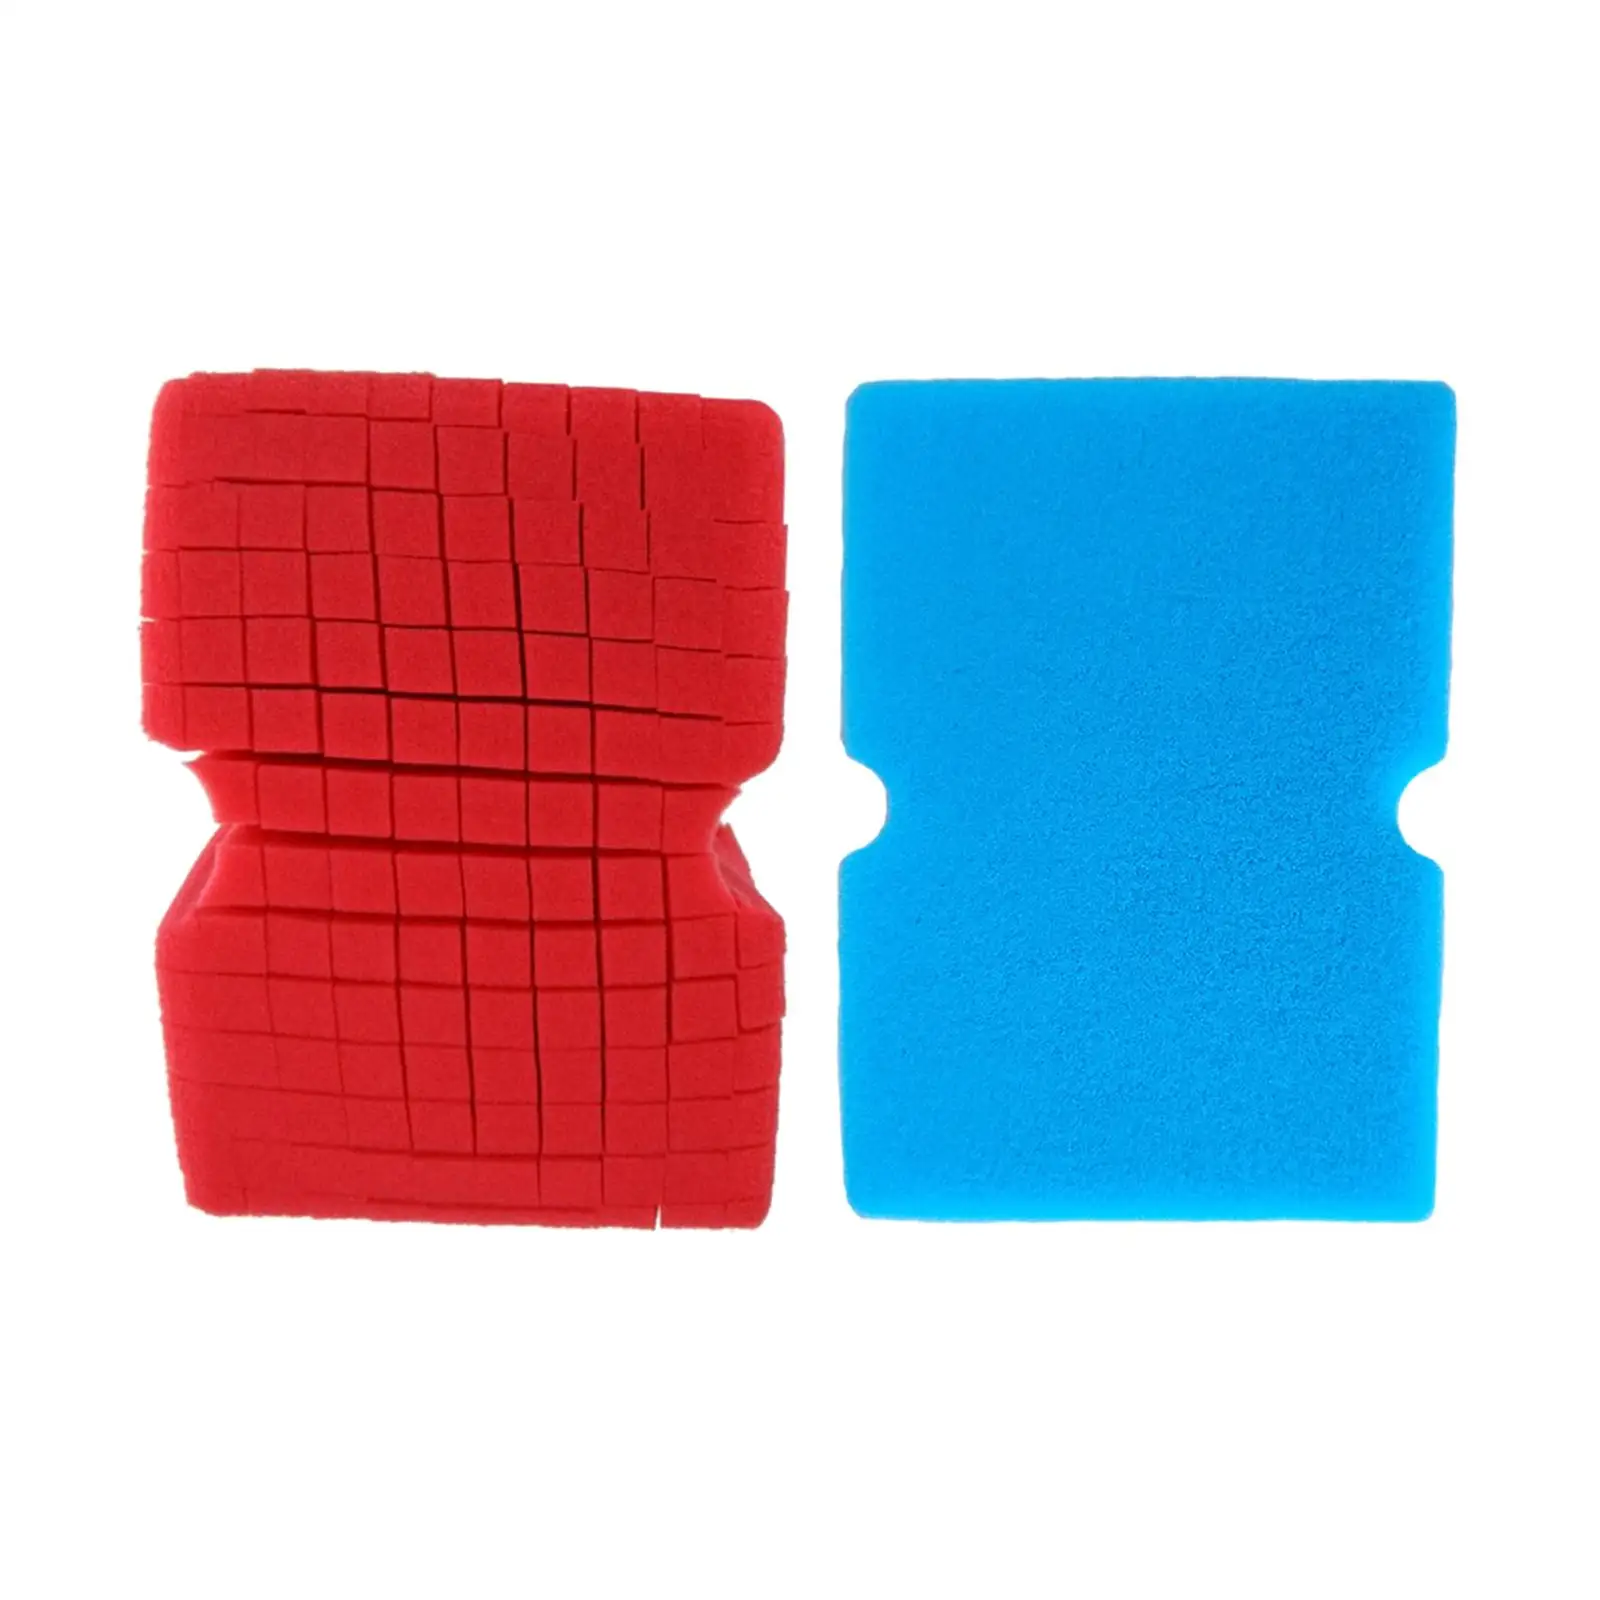 Damp Clean Duster Sponge Strong Water Absorbing Thick Soft Car Household Cleaning Sponge for Trucks Motorcycles Cars Boats